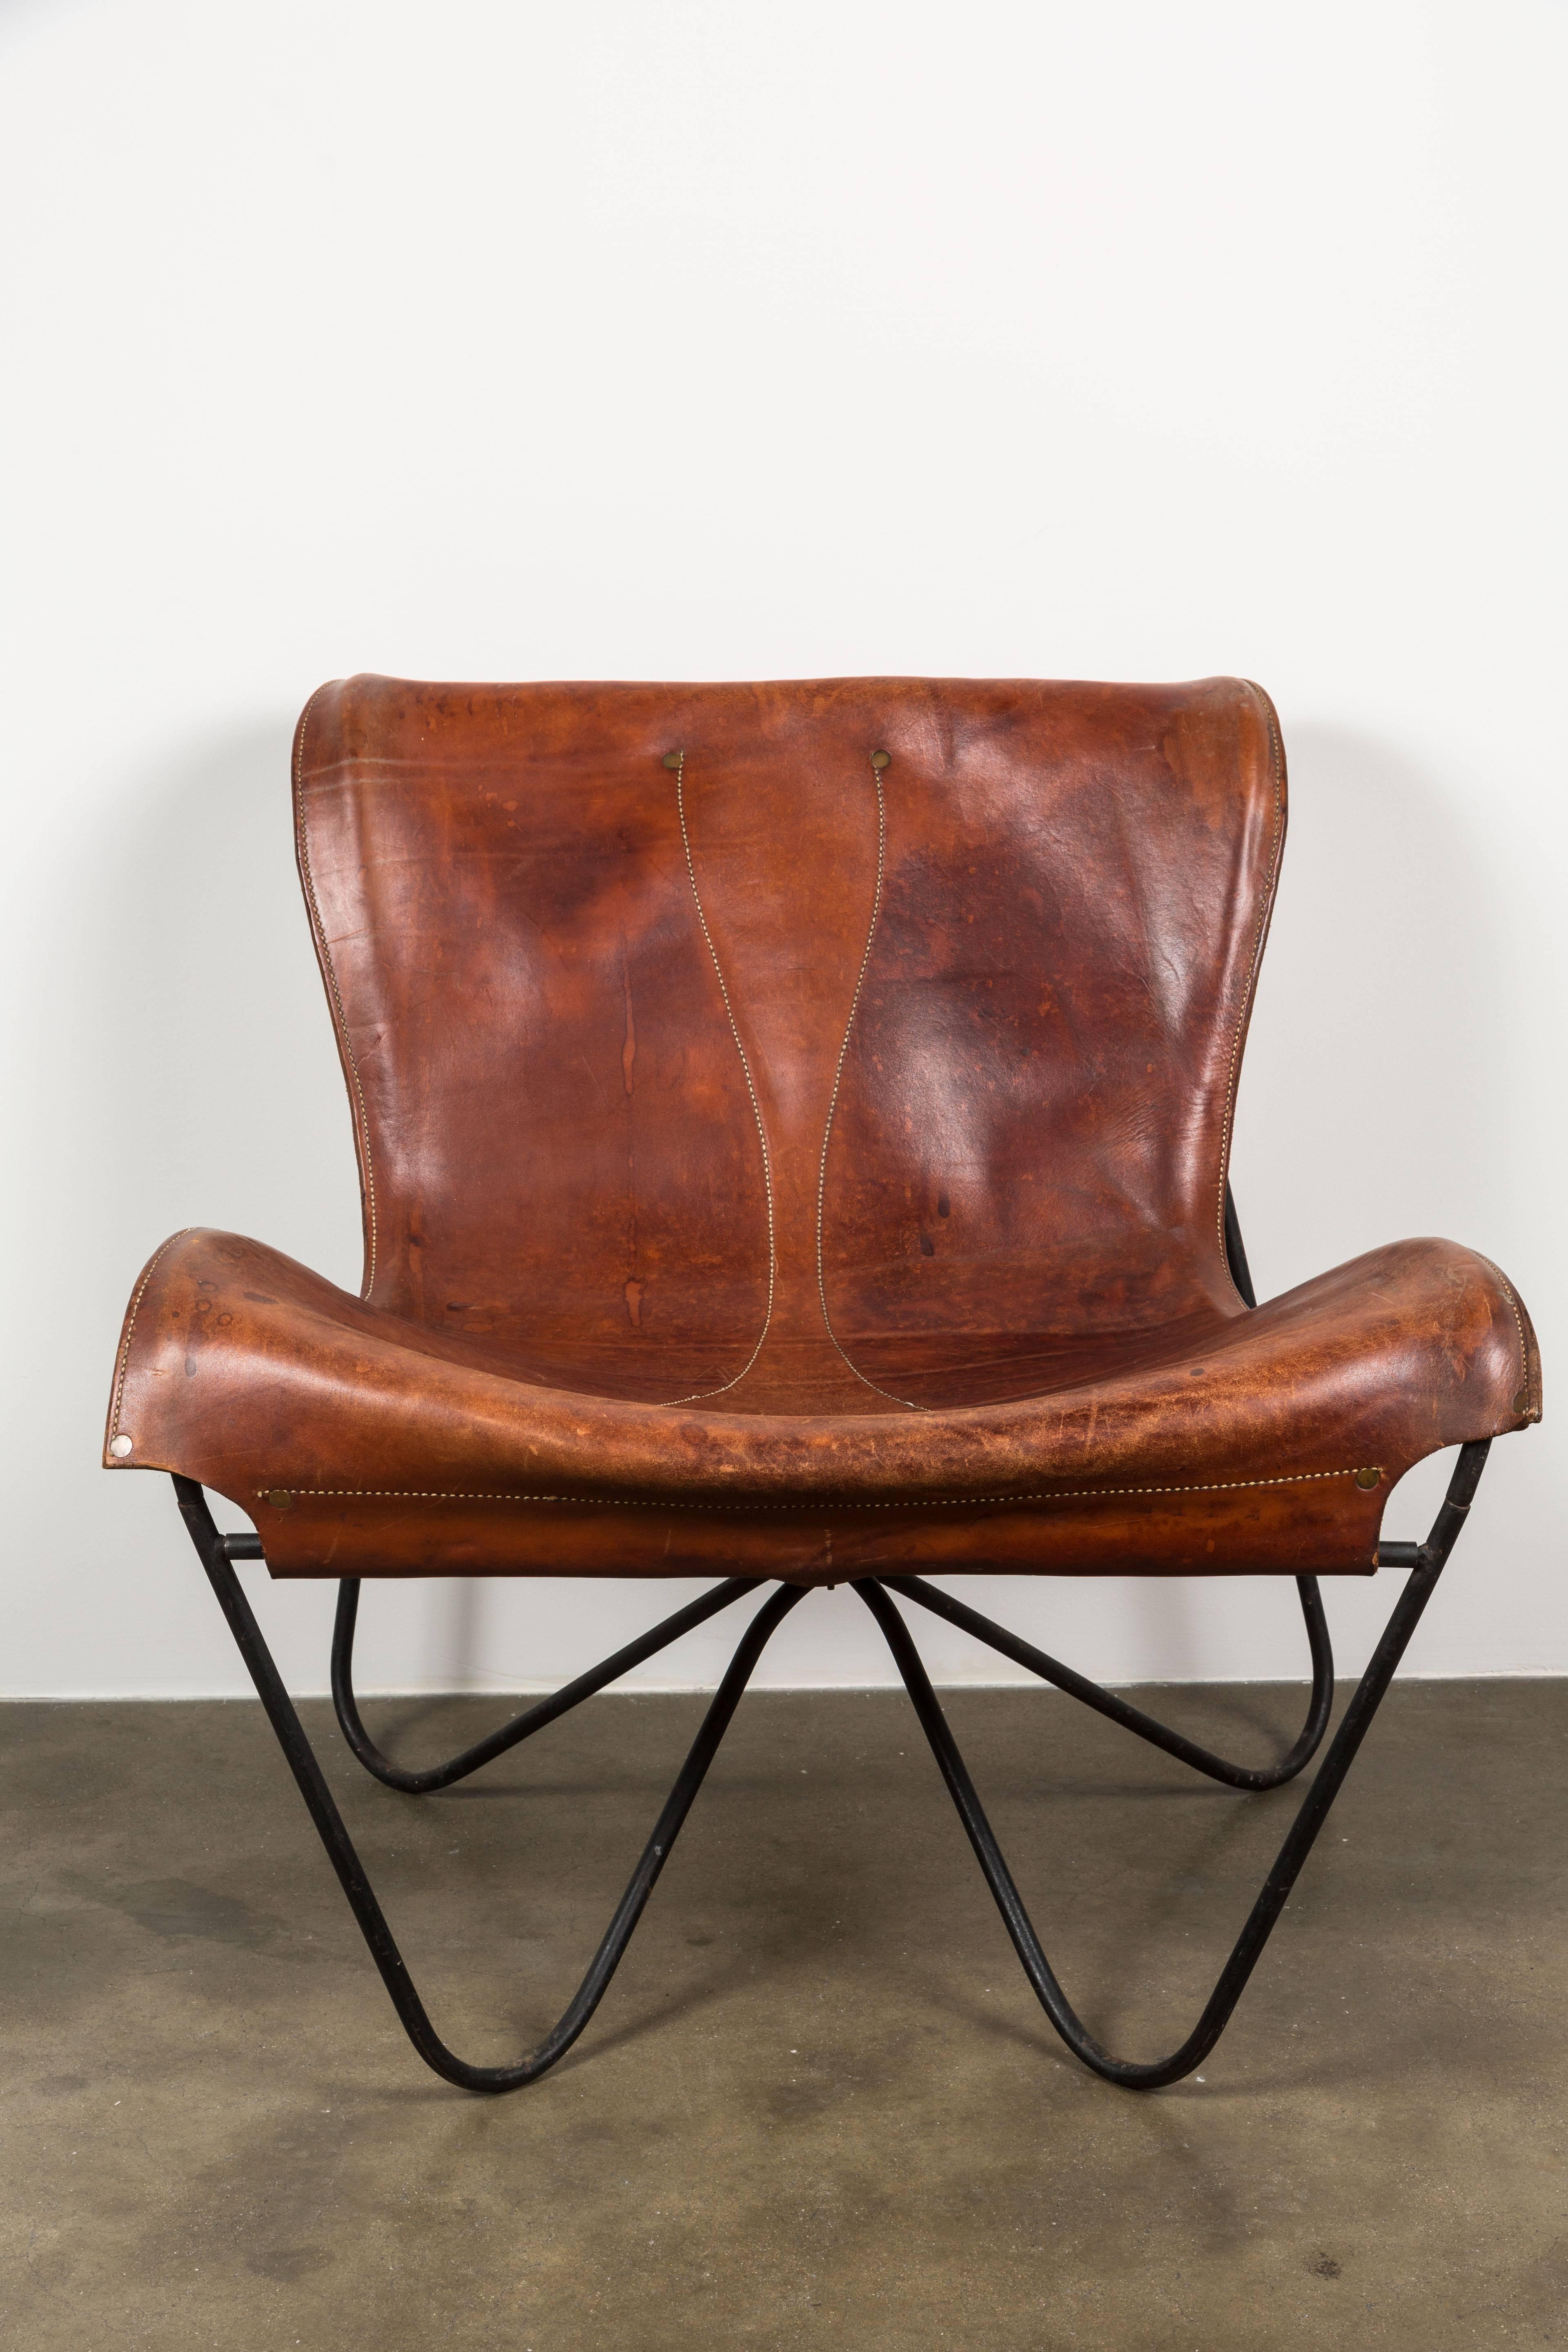 Patinated leather lounge chair with enameled steel frame by Max Gottschalk. Made in USA, circa 1965.